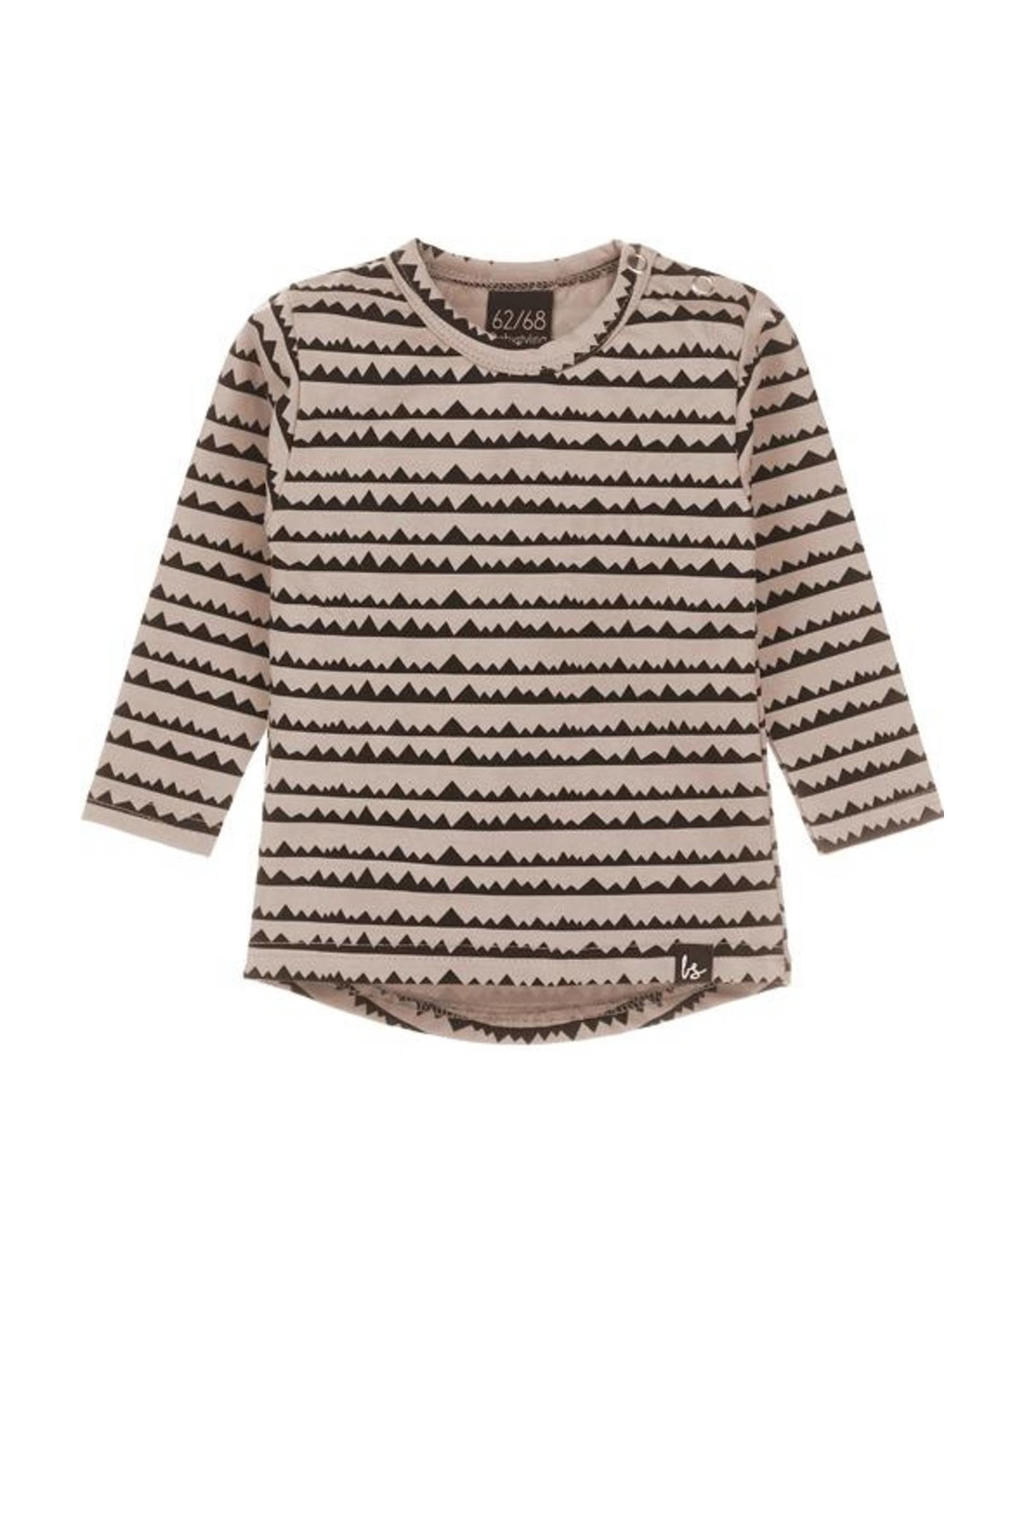 Babystyling baby longsleeve Bergjes met all over print sand